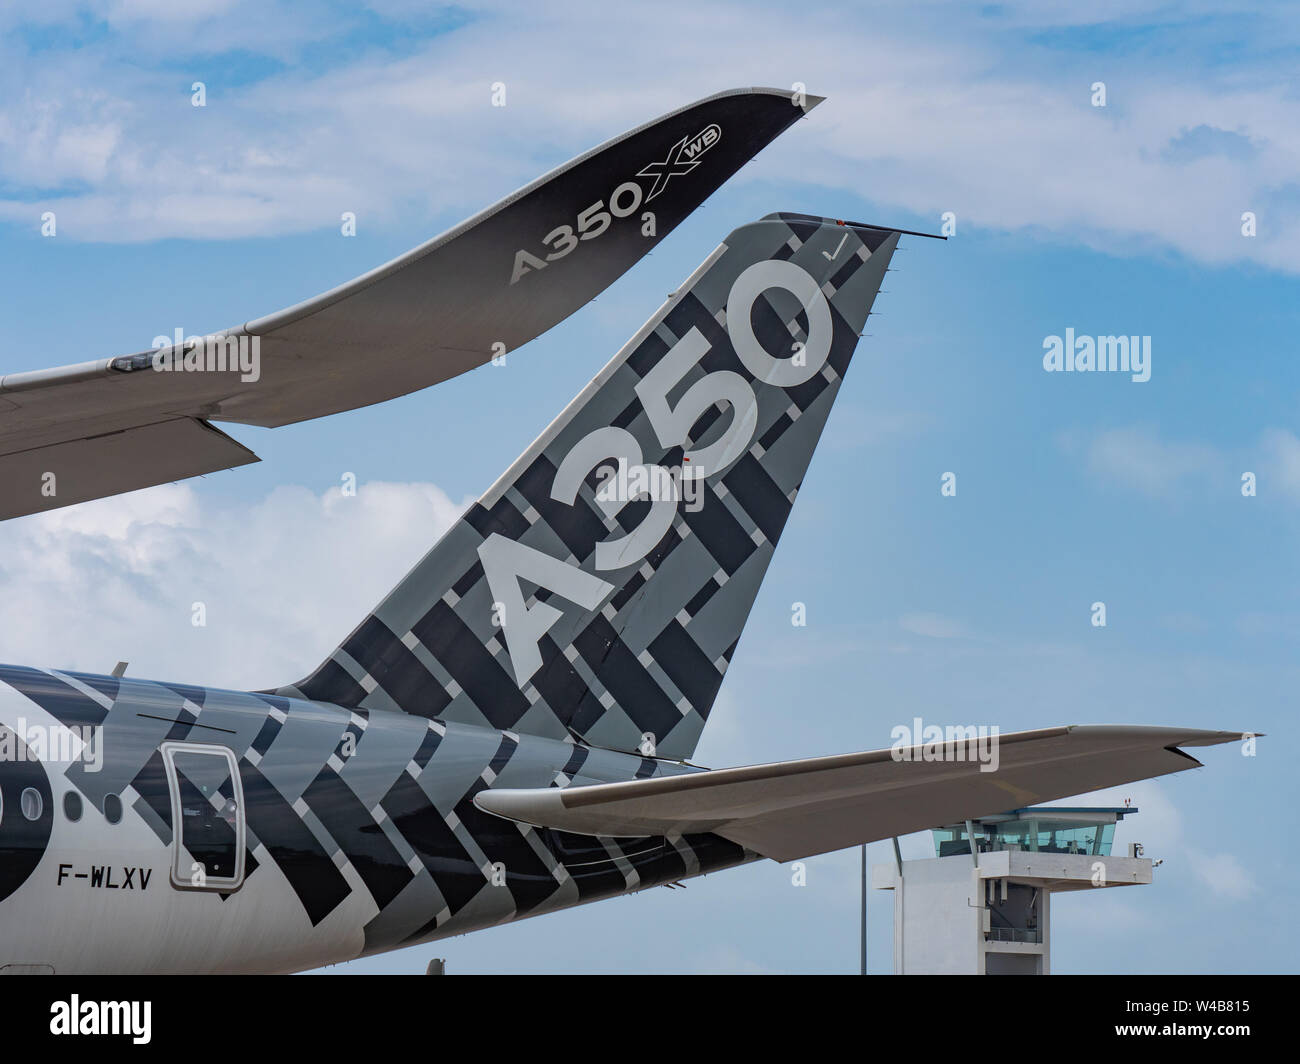 Singapore - February 4, 2018: Winglet and tailplane of Airbus A350-1000 XWB in Airbus factory livery during Singapore Airshow at Changi Exhibition Cen Stock Photo